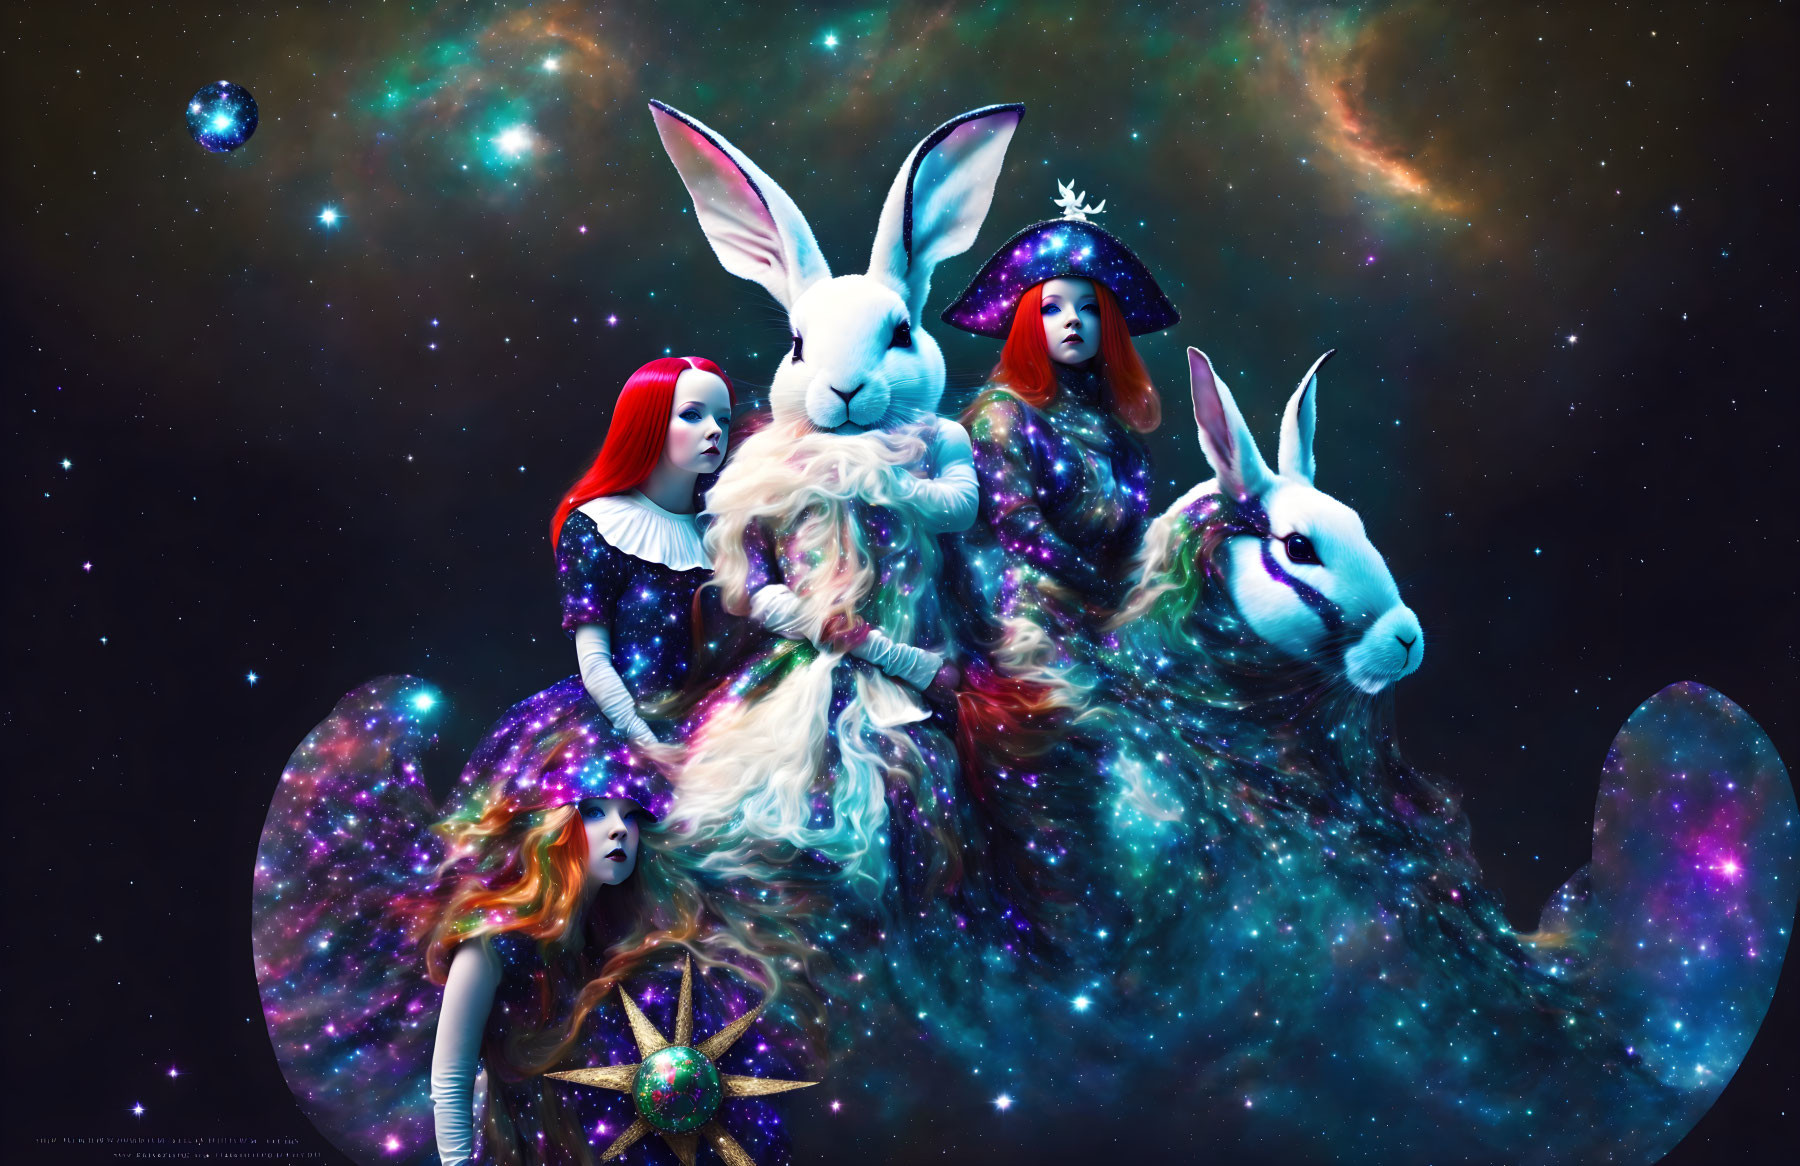 Four women and cosmic rabbits in surreal celestial art